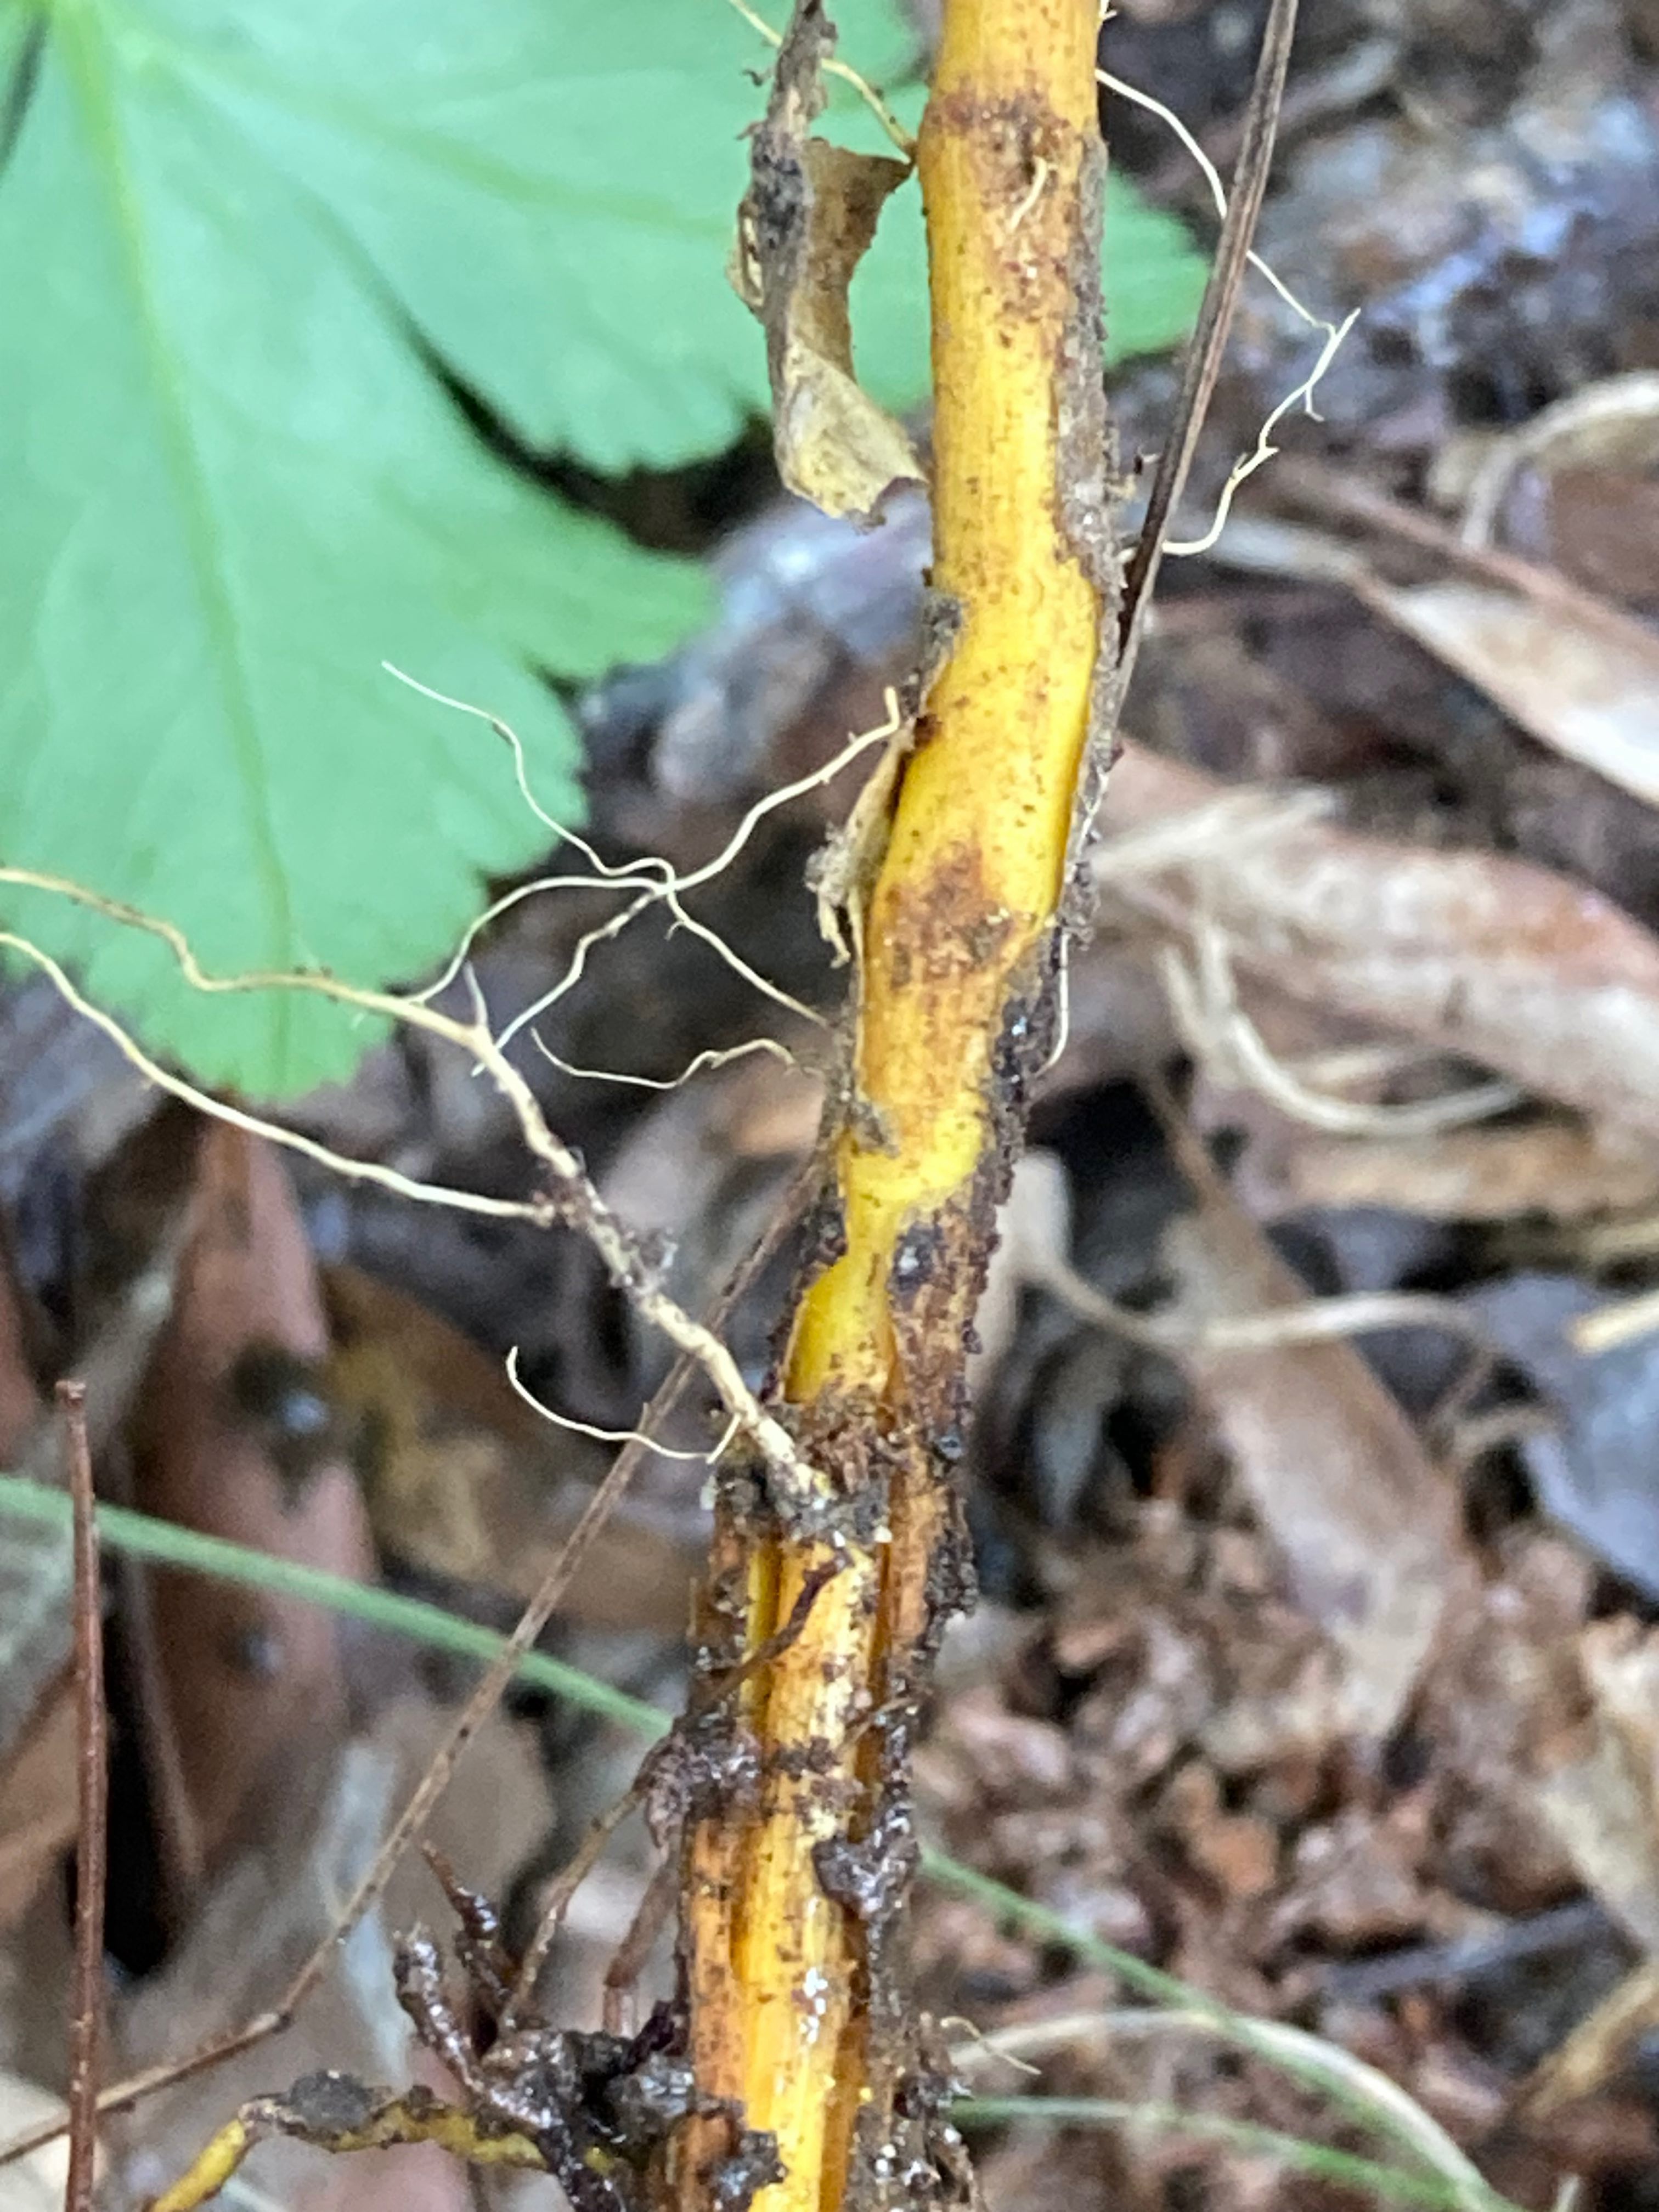 The Scientific Name is Xanthorhiza simplicissima. You will likely hear them called Brook-Feather, Yellowroot. This picture shows the The roots and the broken wood of the stems are bright yellow.  of Xanthorhiza simplicissima